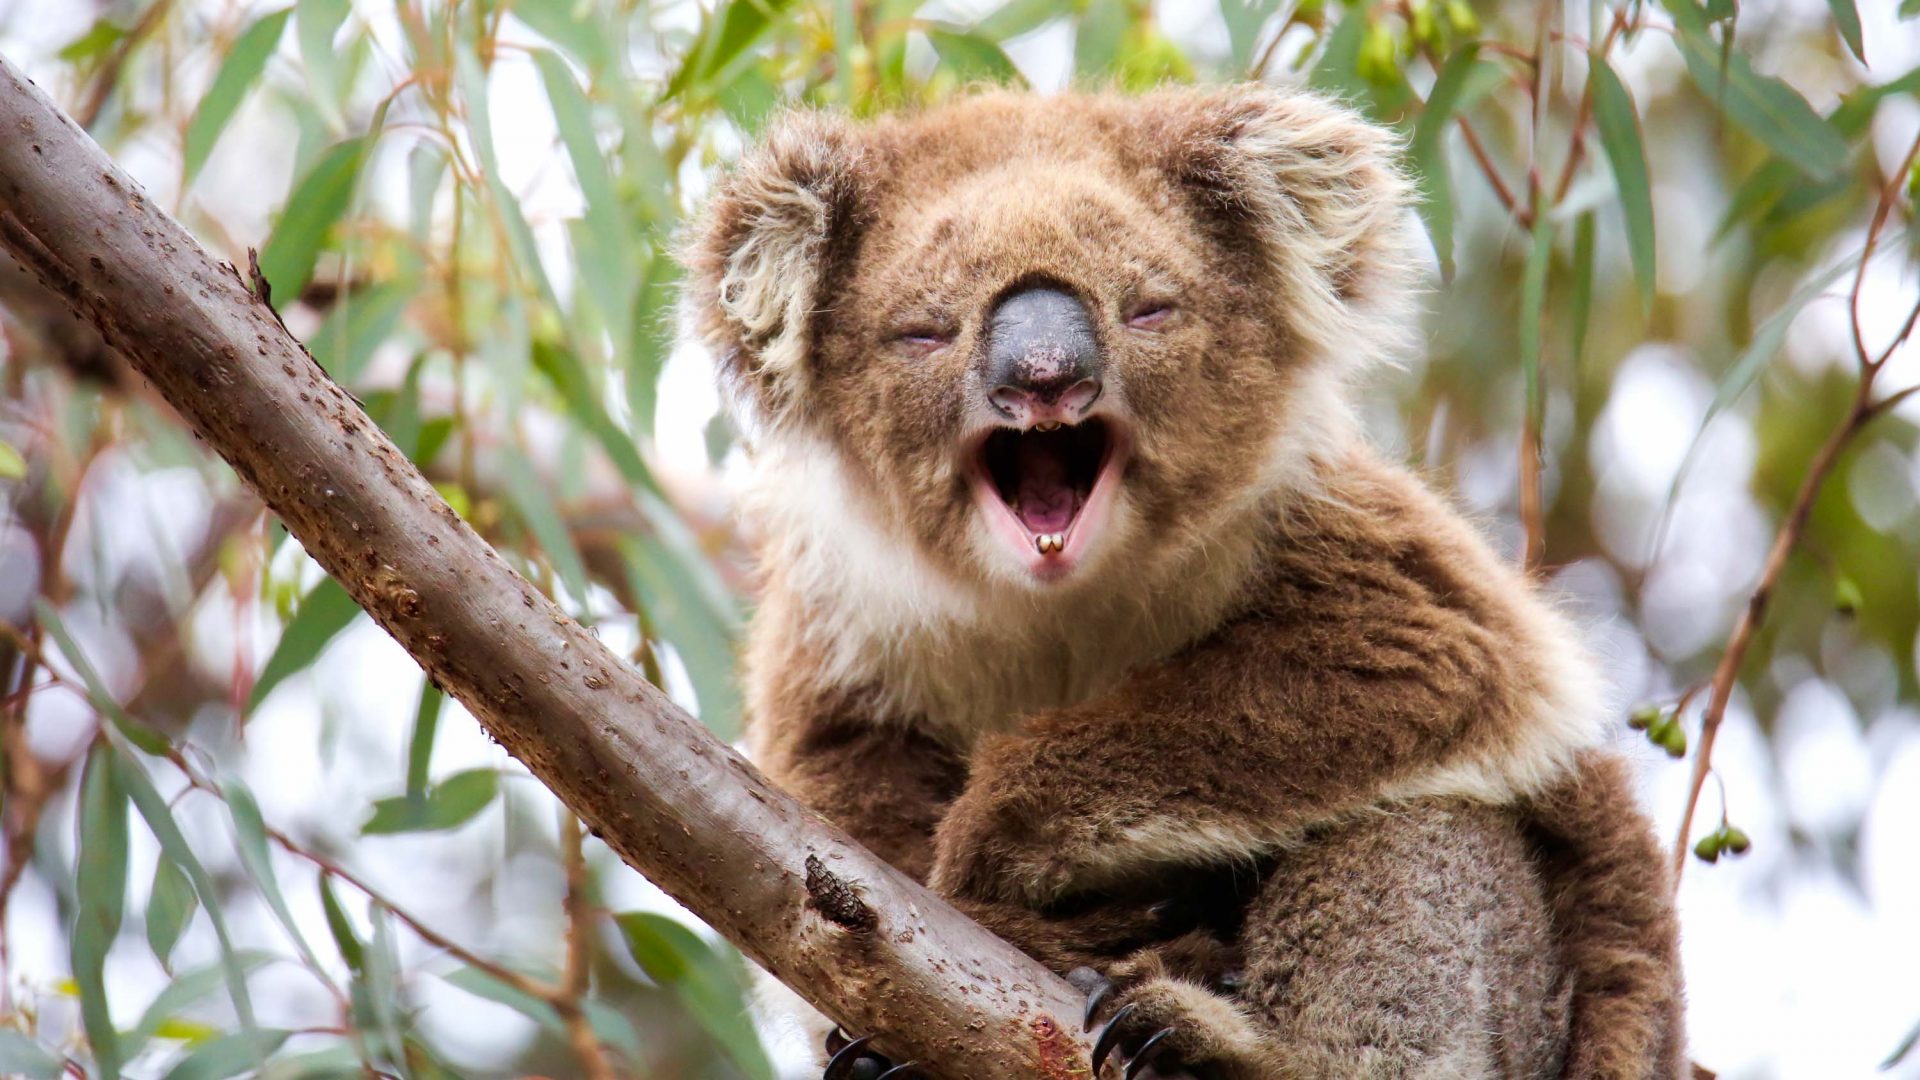 A koala with its mouth open